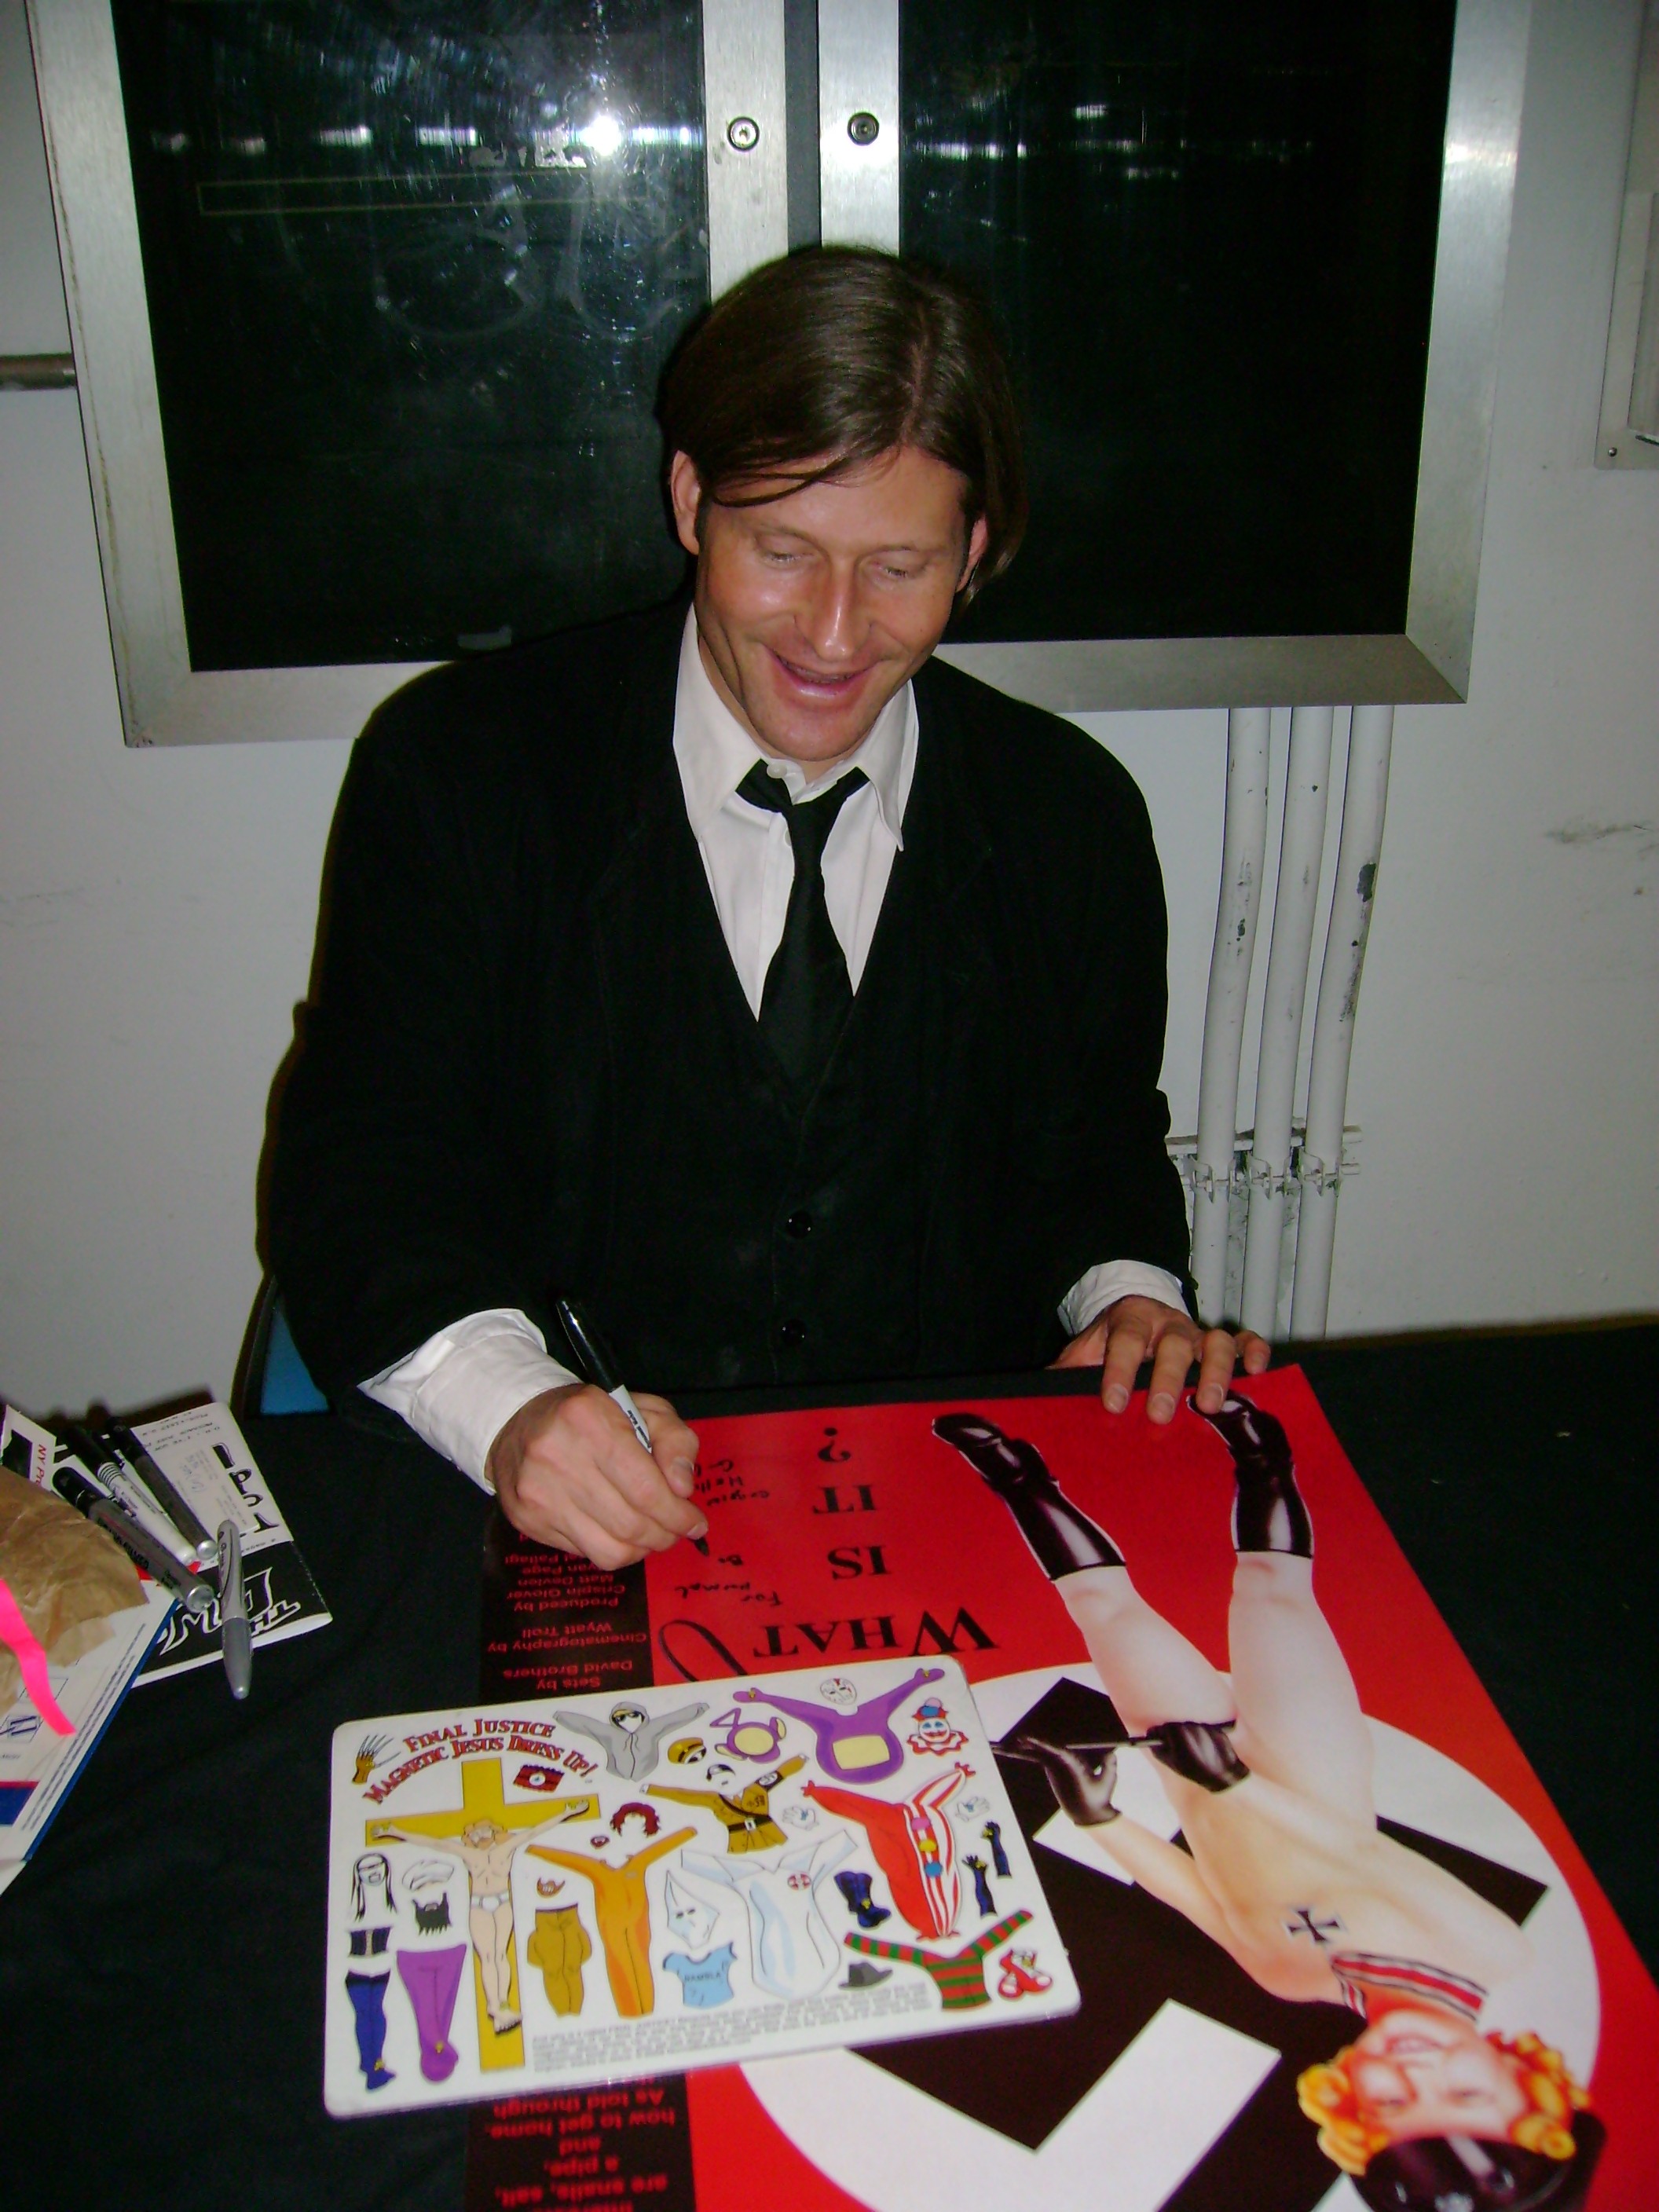 Crispin Glover laughing nervously at offensive magnets